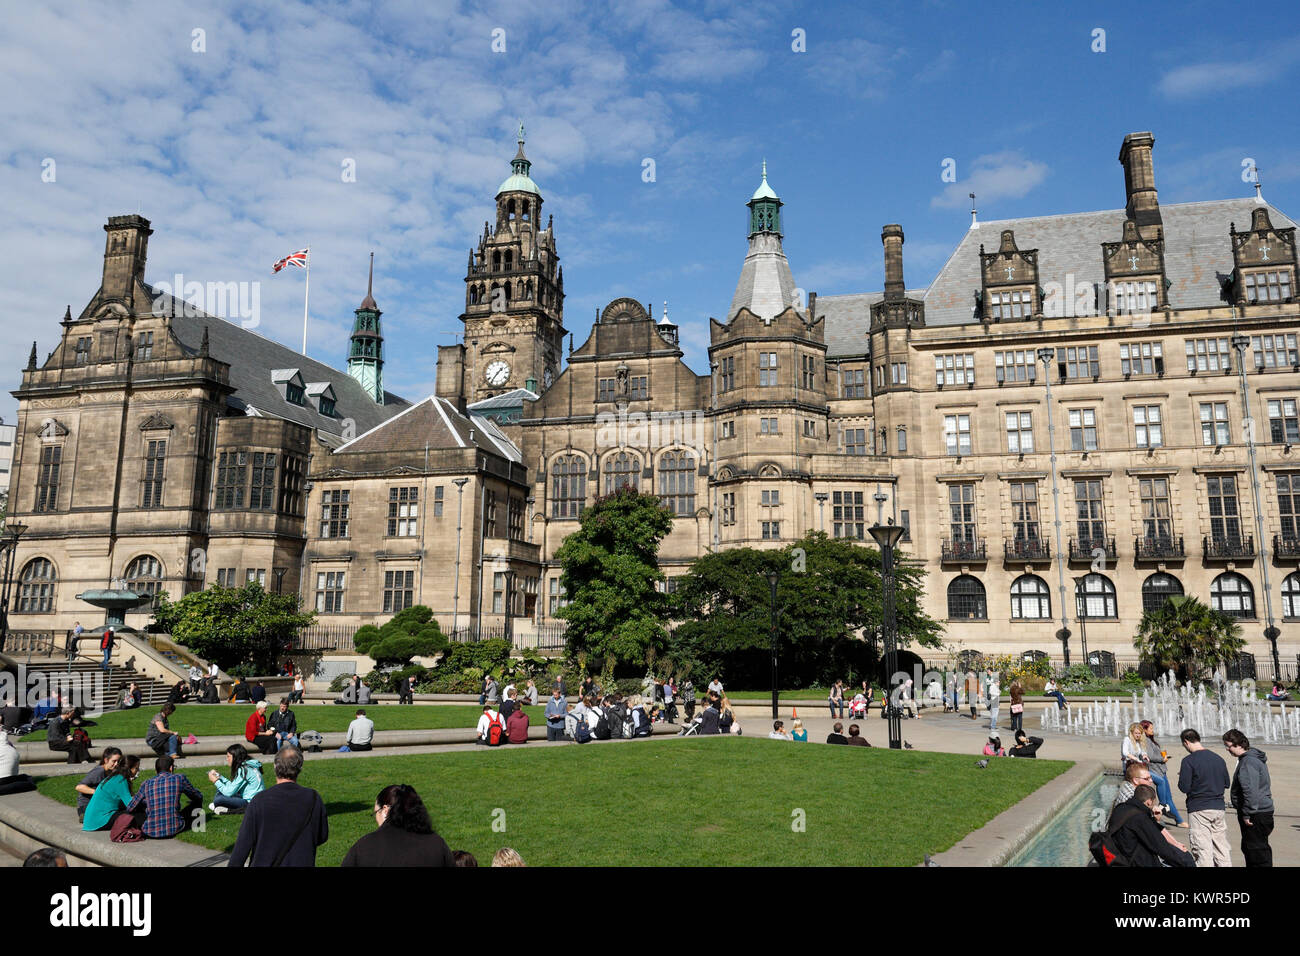 Peace gardens, and Town hall, Sheffield city centre, UK Stock Photo